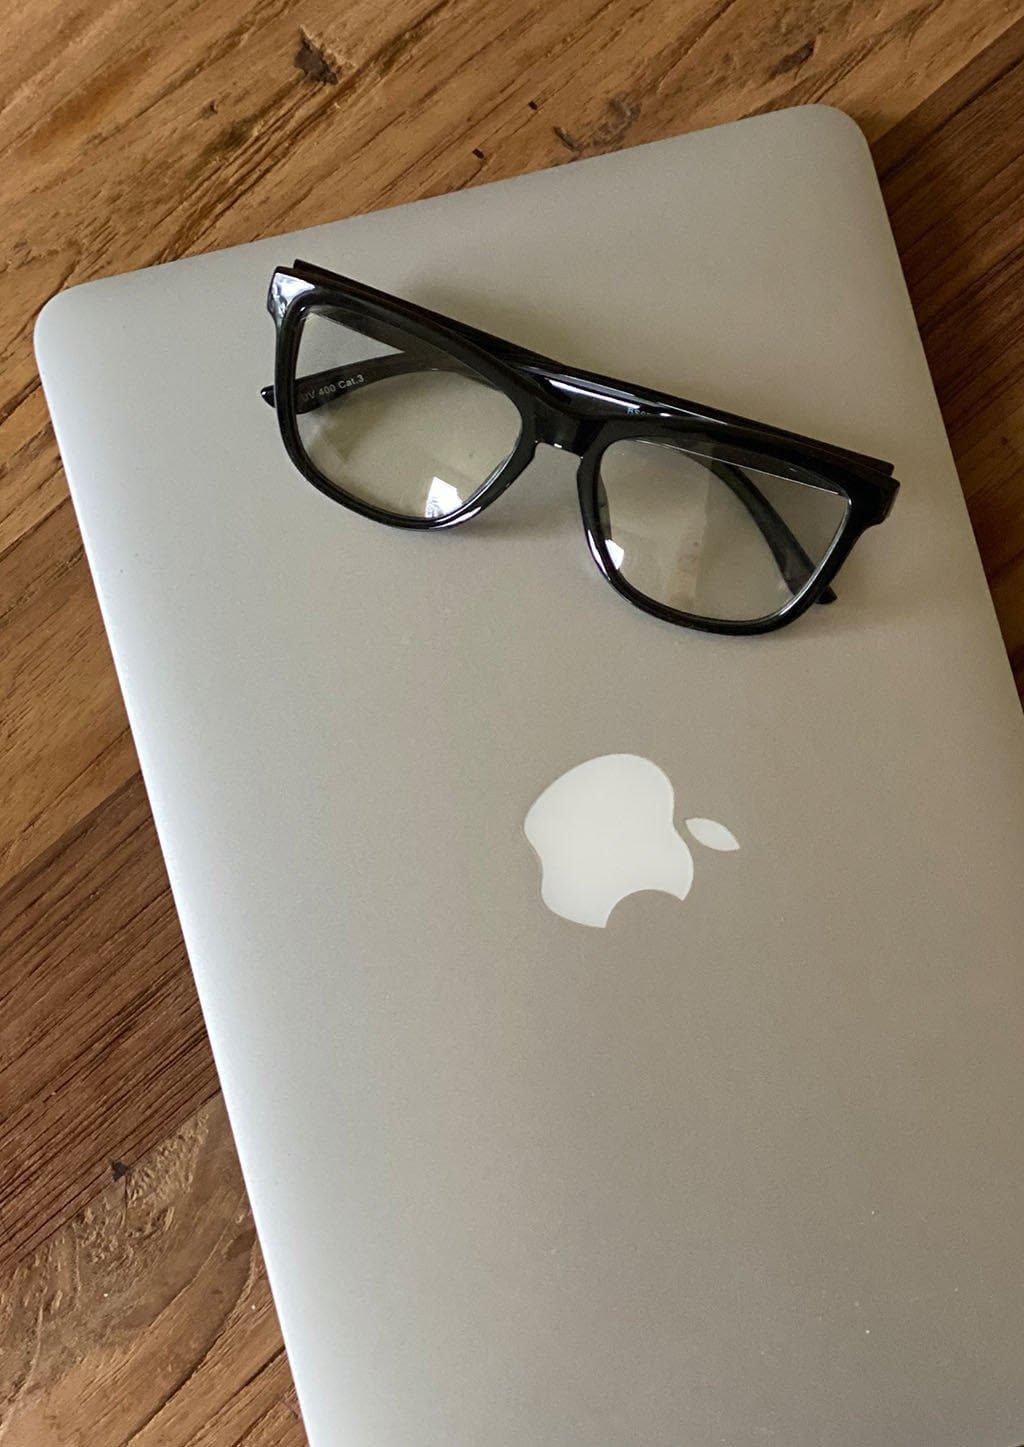 Our Photochromic anti bluelight black glasses that work like two in one. Turns dark in the sun and clear inside.  Works perfect for work and gaming.